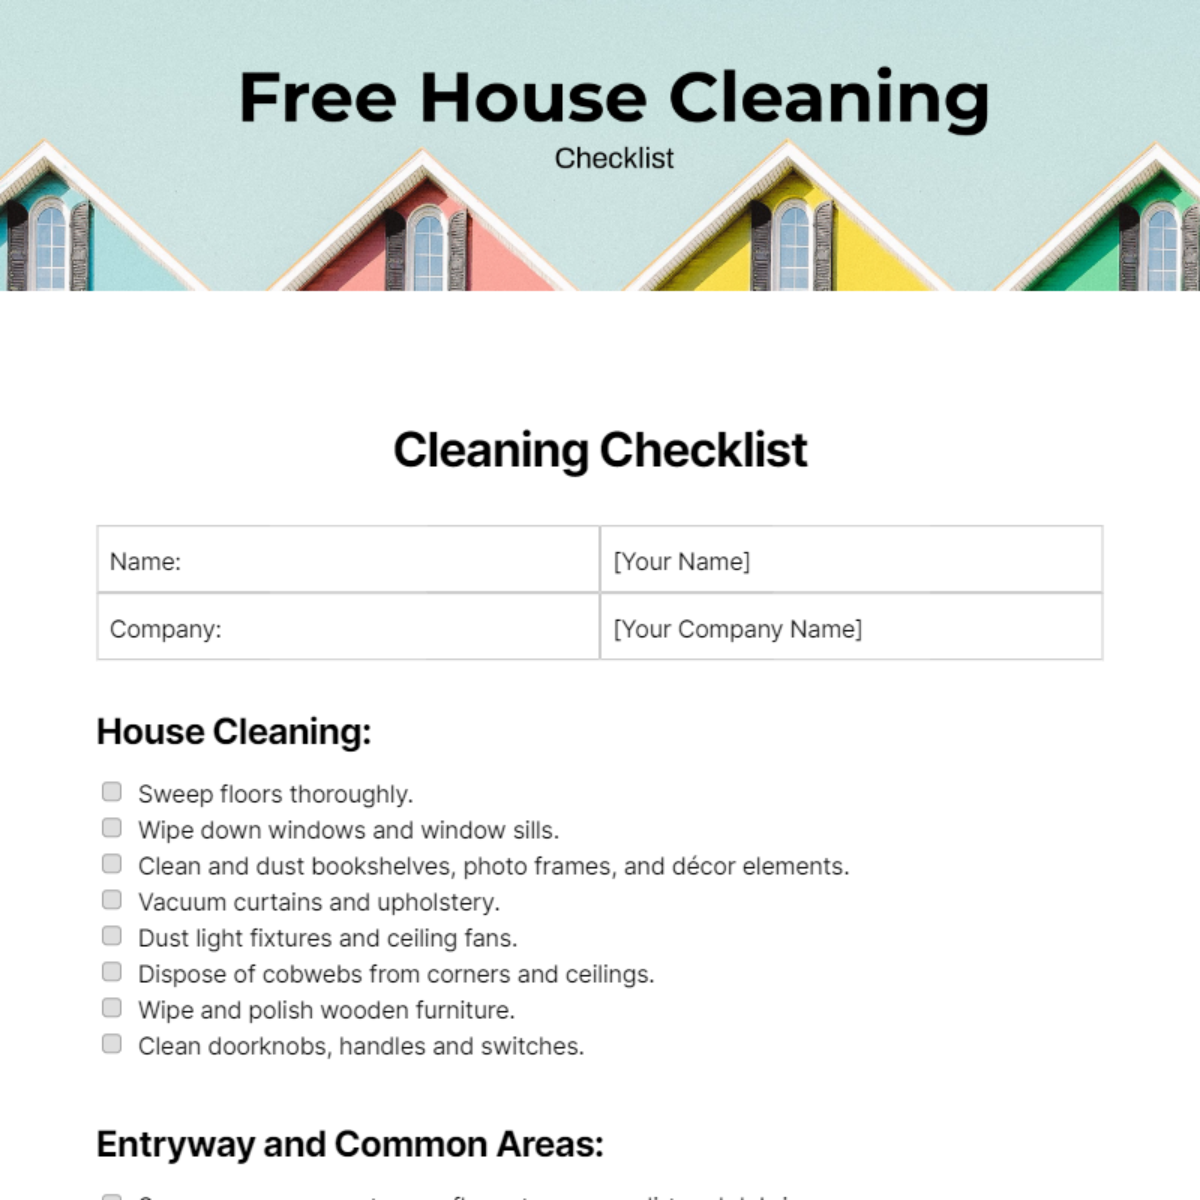 Free House Cleaning Checklist Template